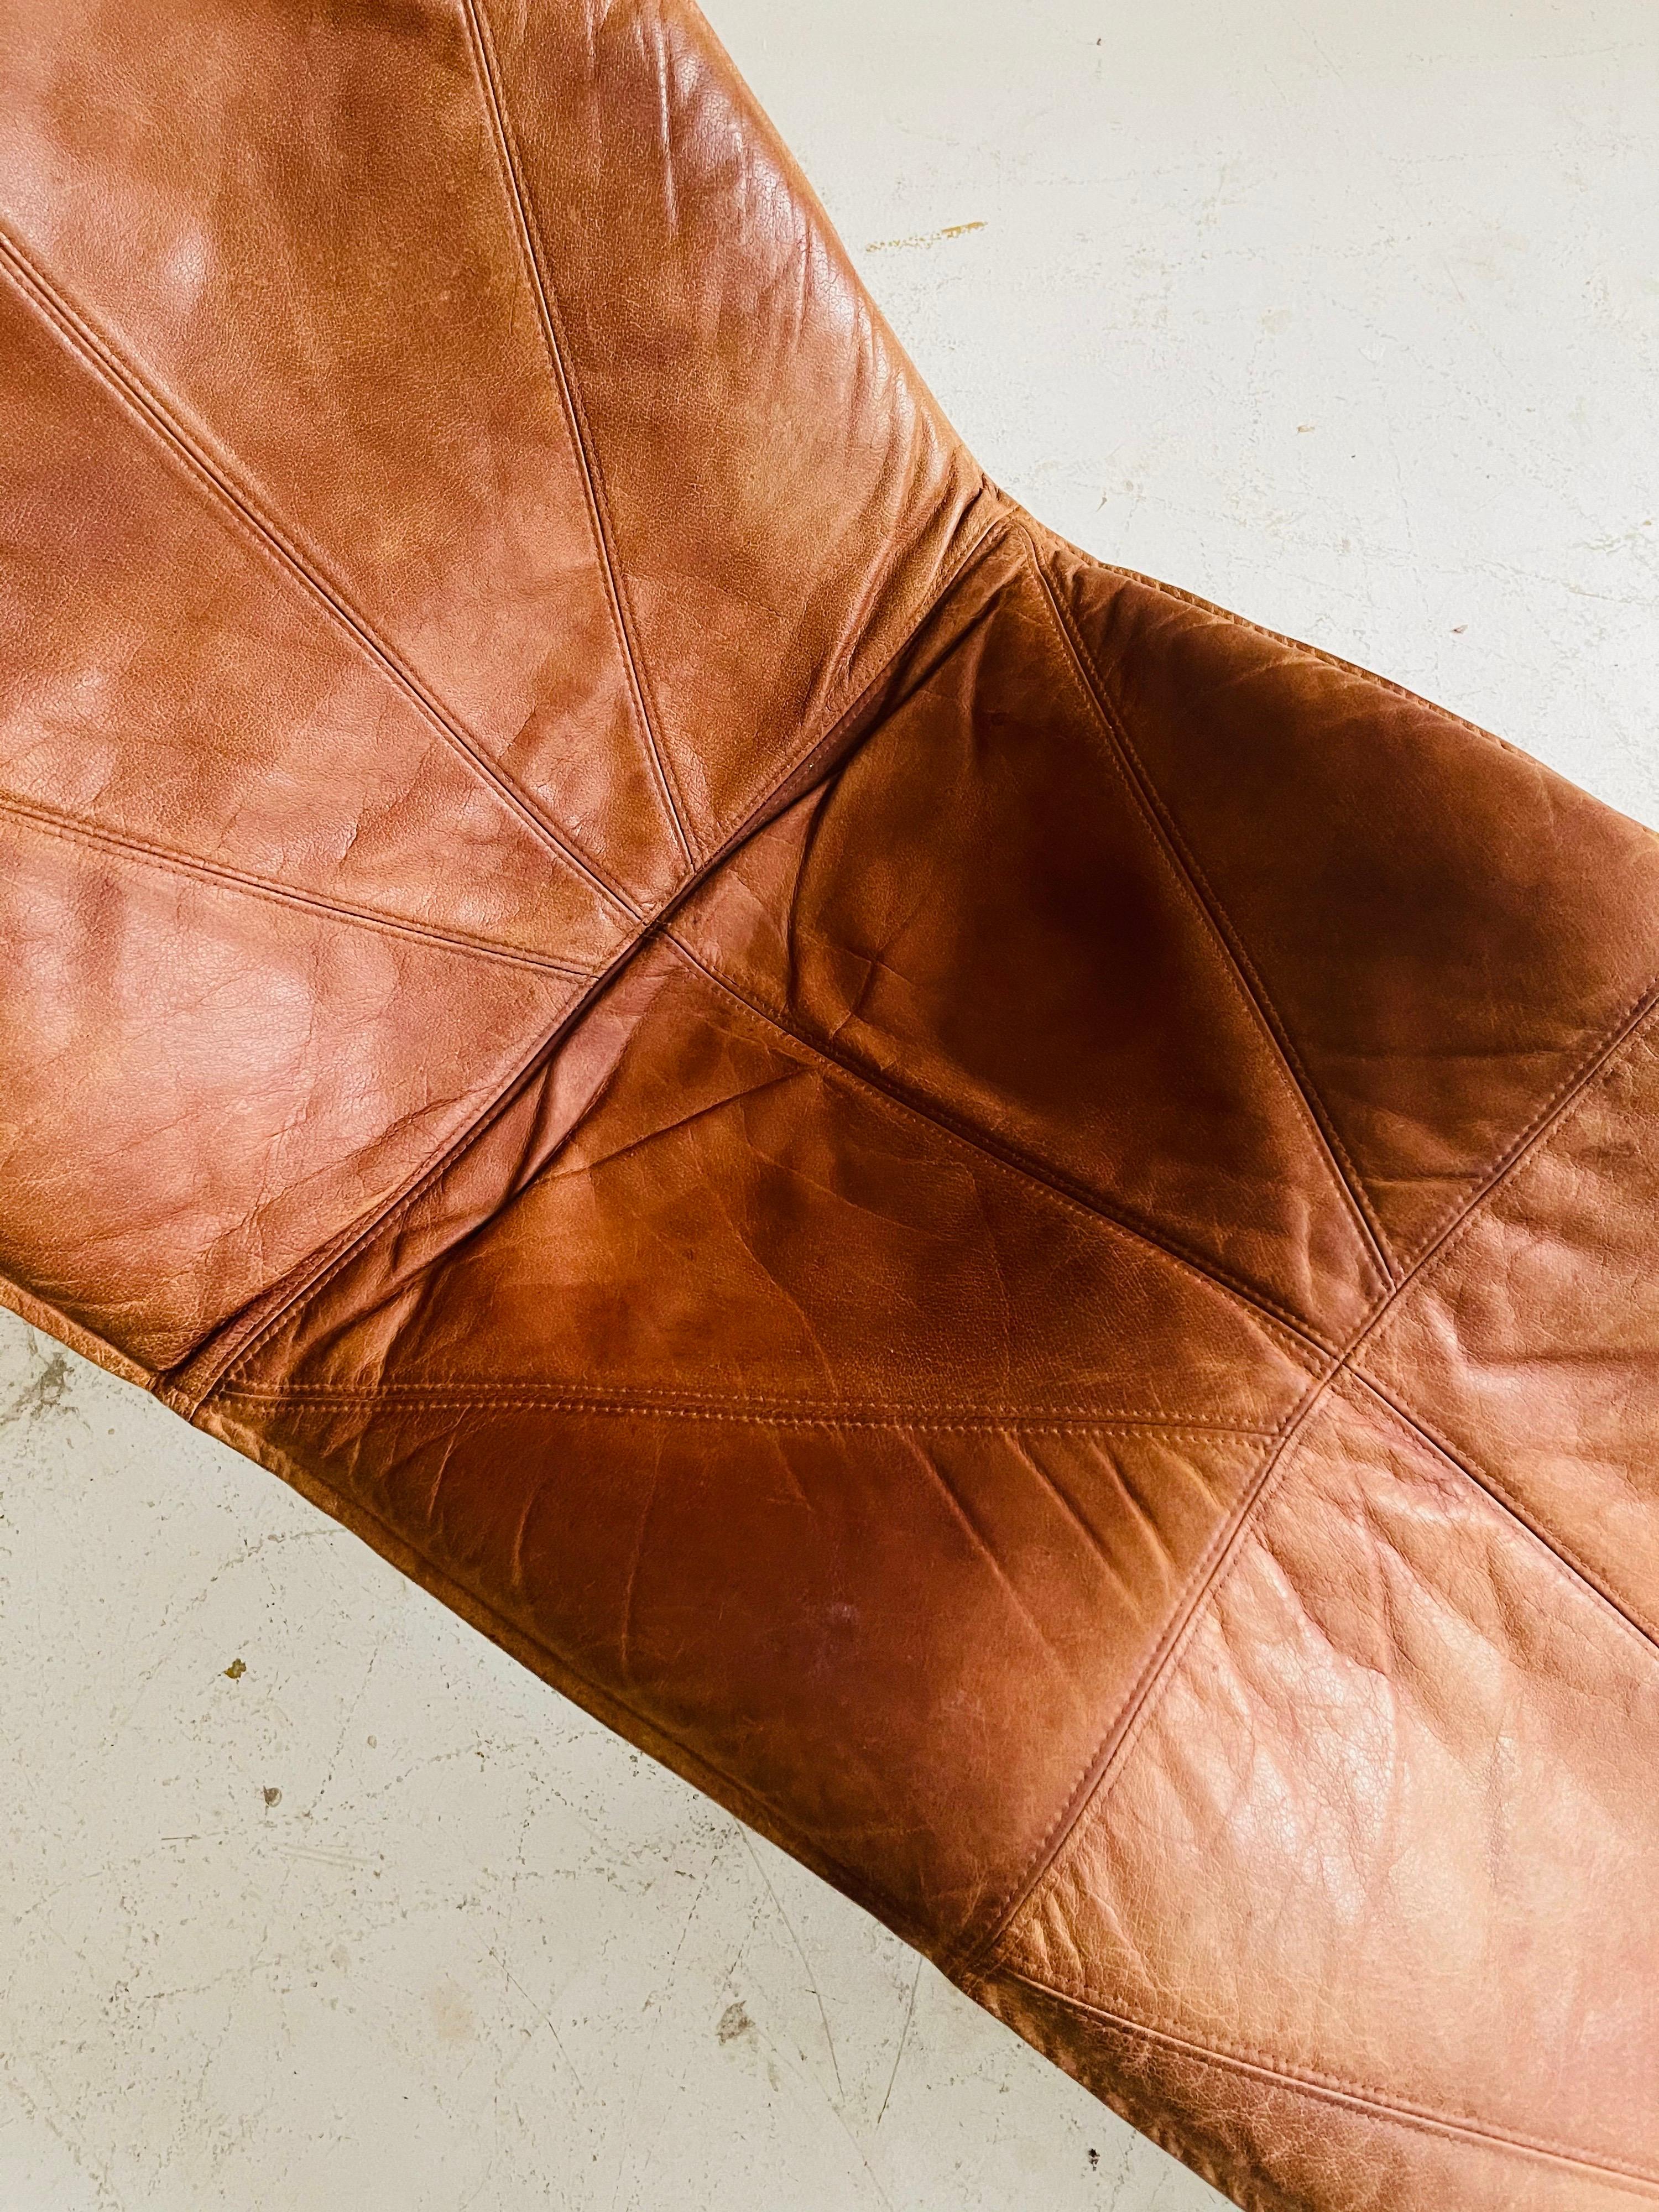 Patinated Cognac Leather Chaise Longue by Tord Bjorklund, Sweden, 1970 For Sale 5